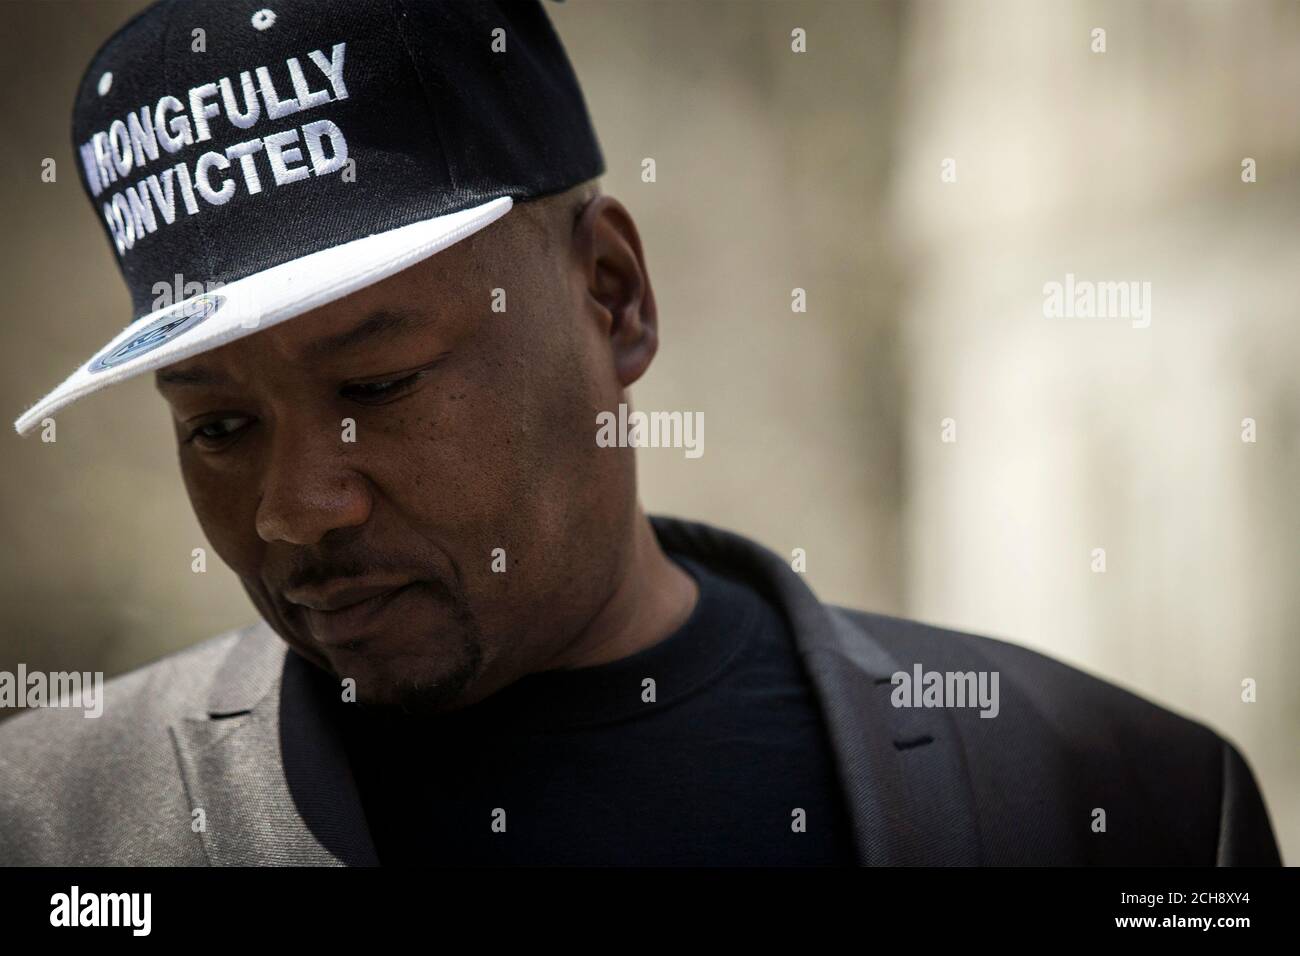 Derrick Hamilton, pauses while speaking to the press during a rally for the Wrongly Convicted at City Hall in New York April 9, 2014. Hamilton spent 20 years in prison for  murder he didn't commit and was finally released after his conviction was further investigated. REUTERS/Brendan McDermid (UNITED STATES - Tags: CRIME LAW) Stock Photo